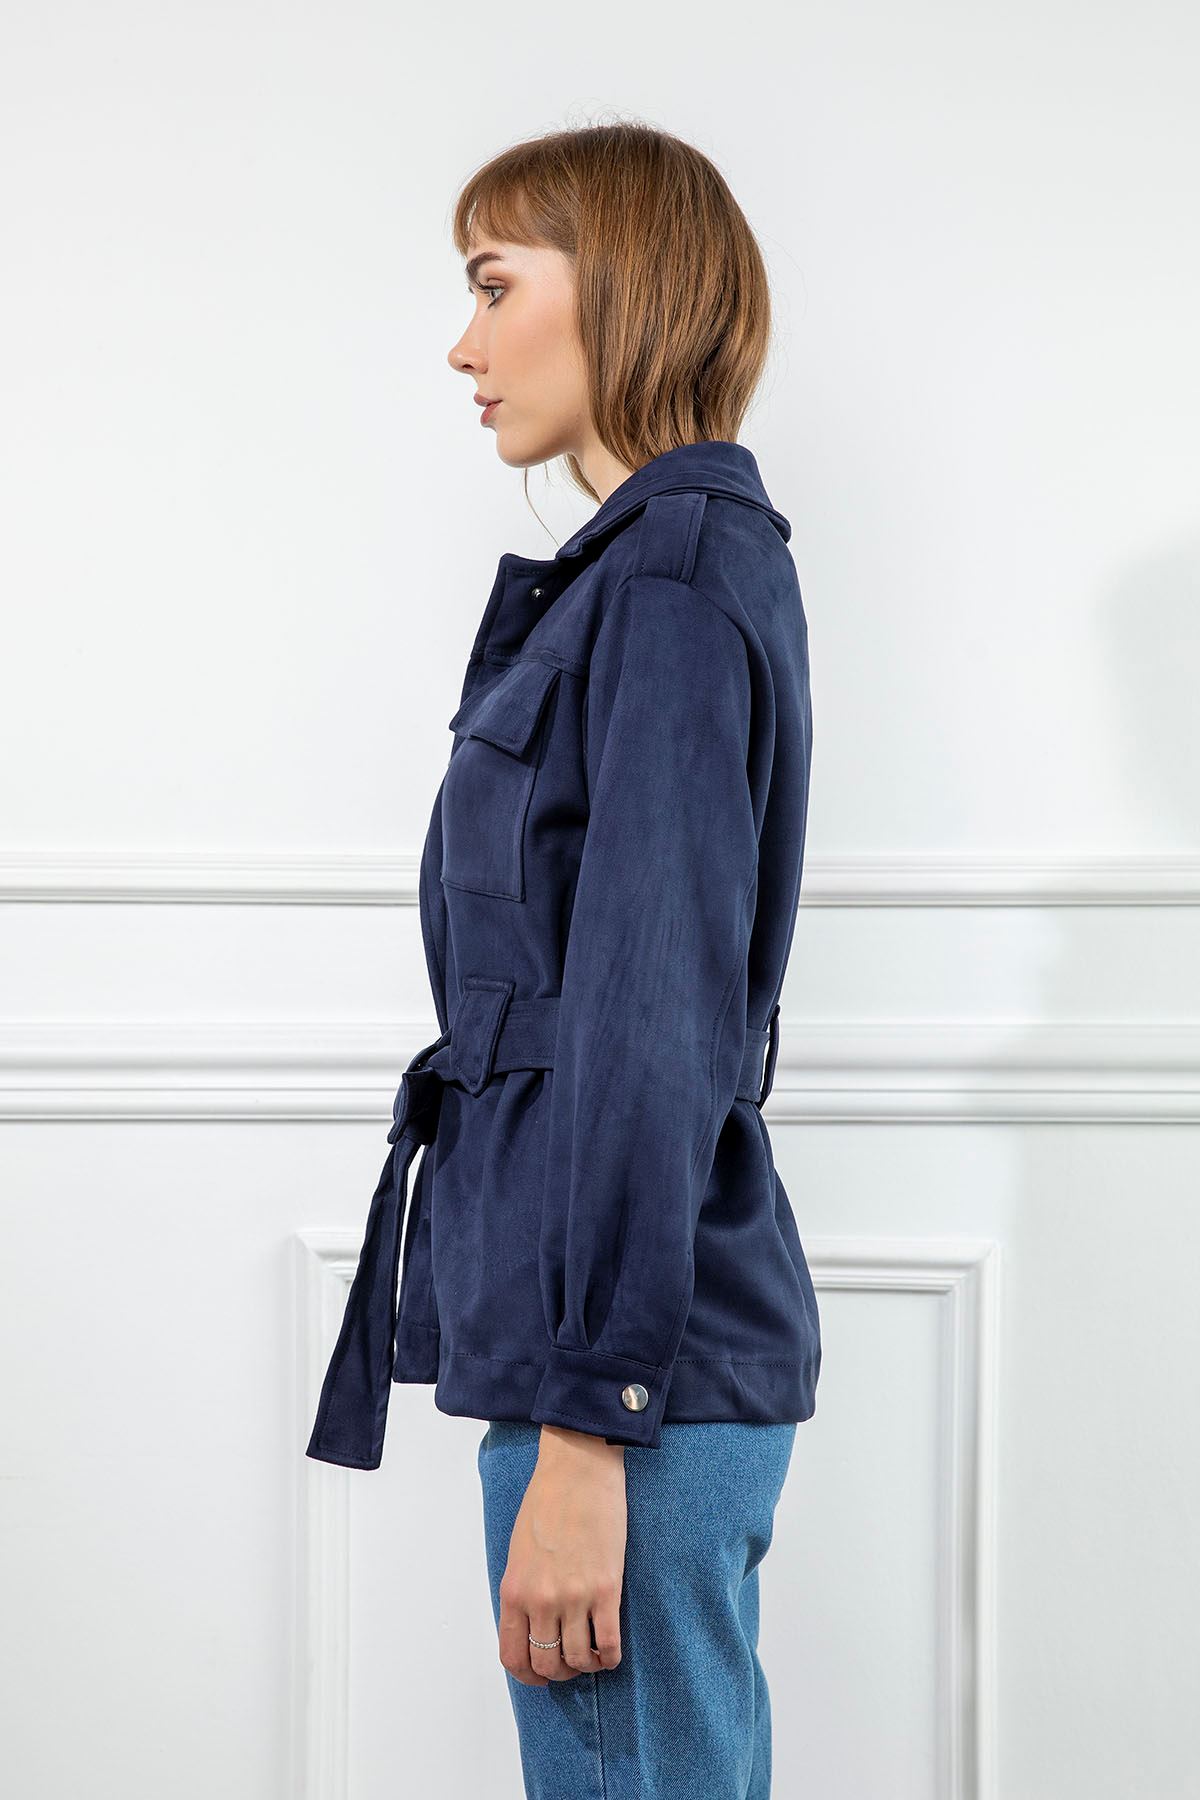 Suede Fabric Long Sleeve Shirt Collar Full Fit Belted Women Jacket - Navy Blue 